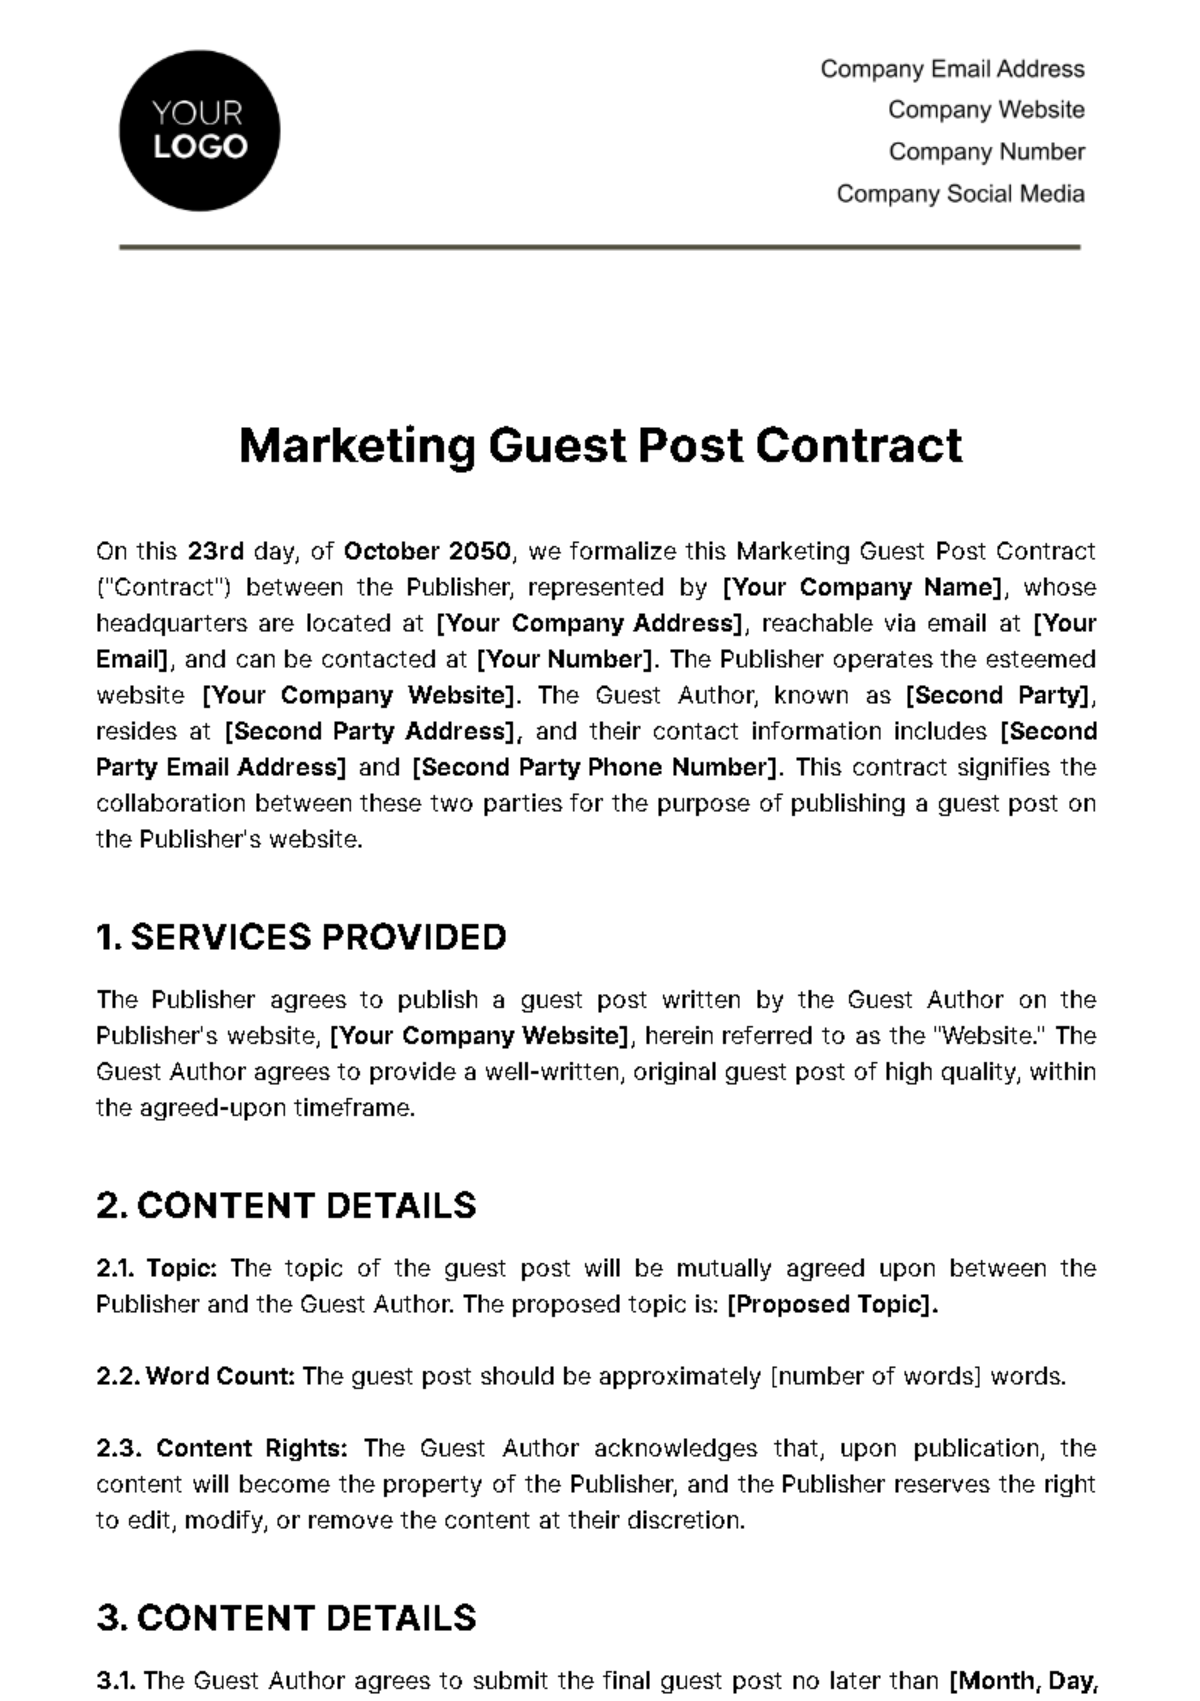 Free Marketing Guest Post Contract Template